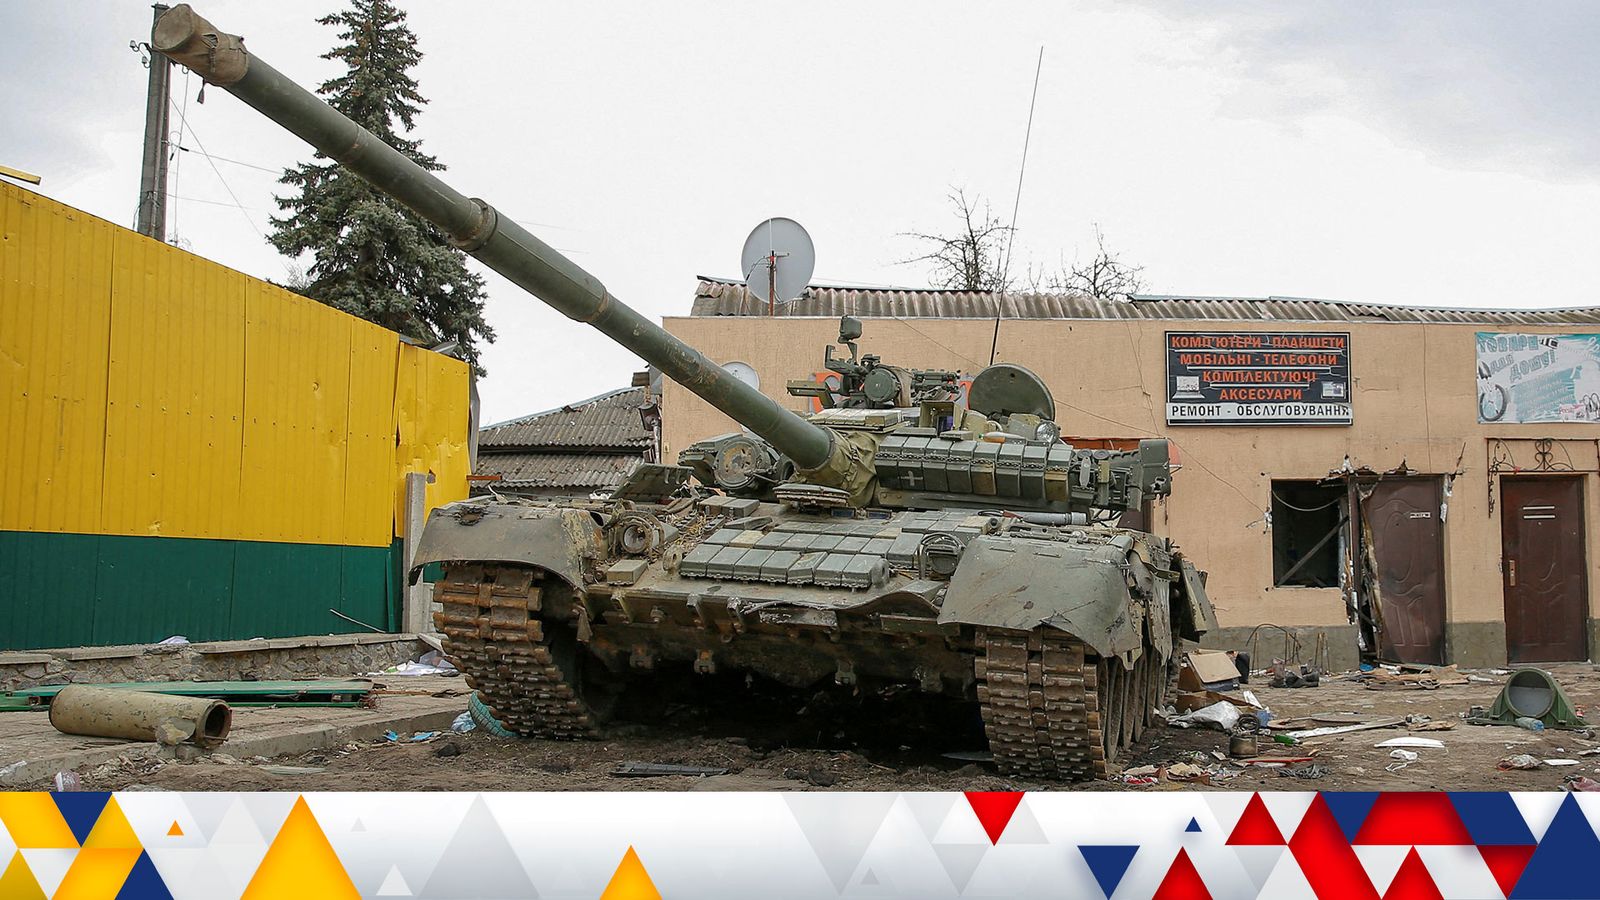 War in Ukraine has wiped out half of Russia's modern battle tanks, say experts